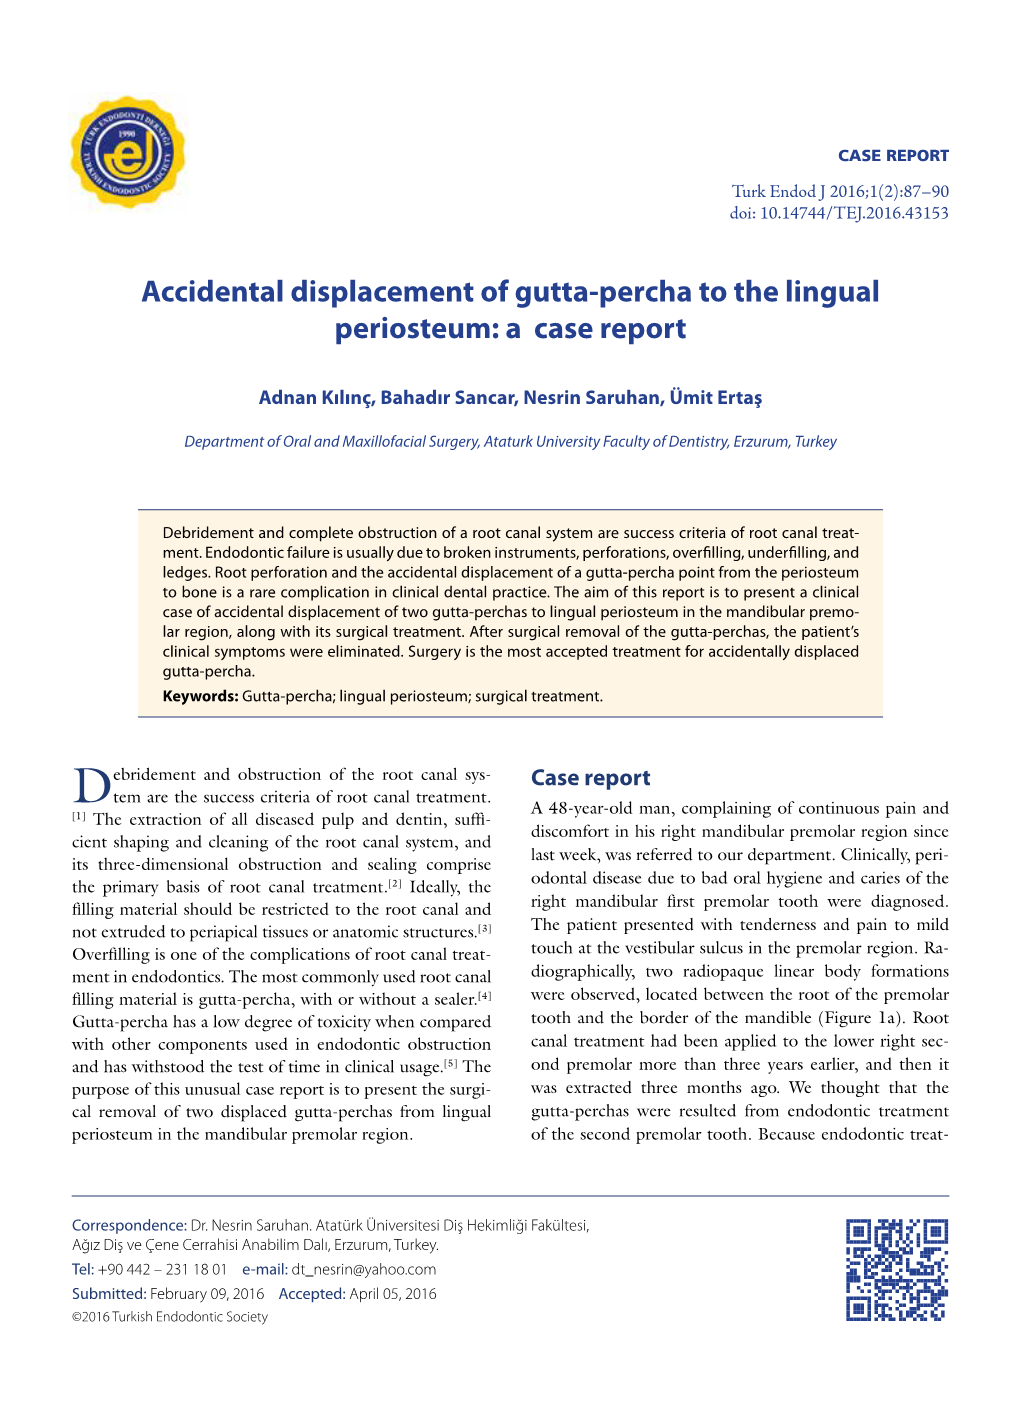 Accidental Displacement of Gutta-Percha to the Lingual Periosteum: a Case Report